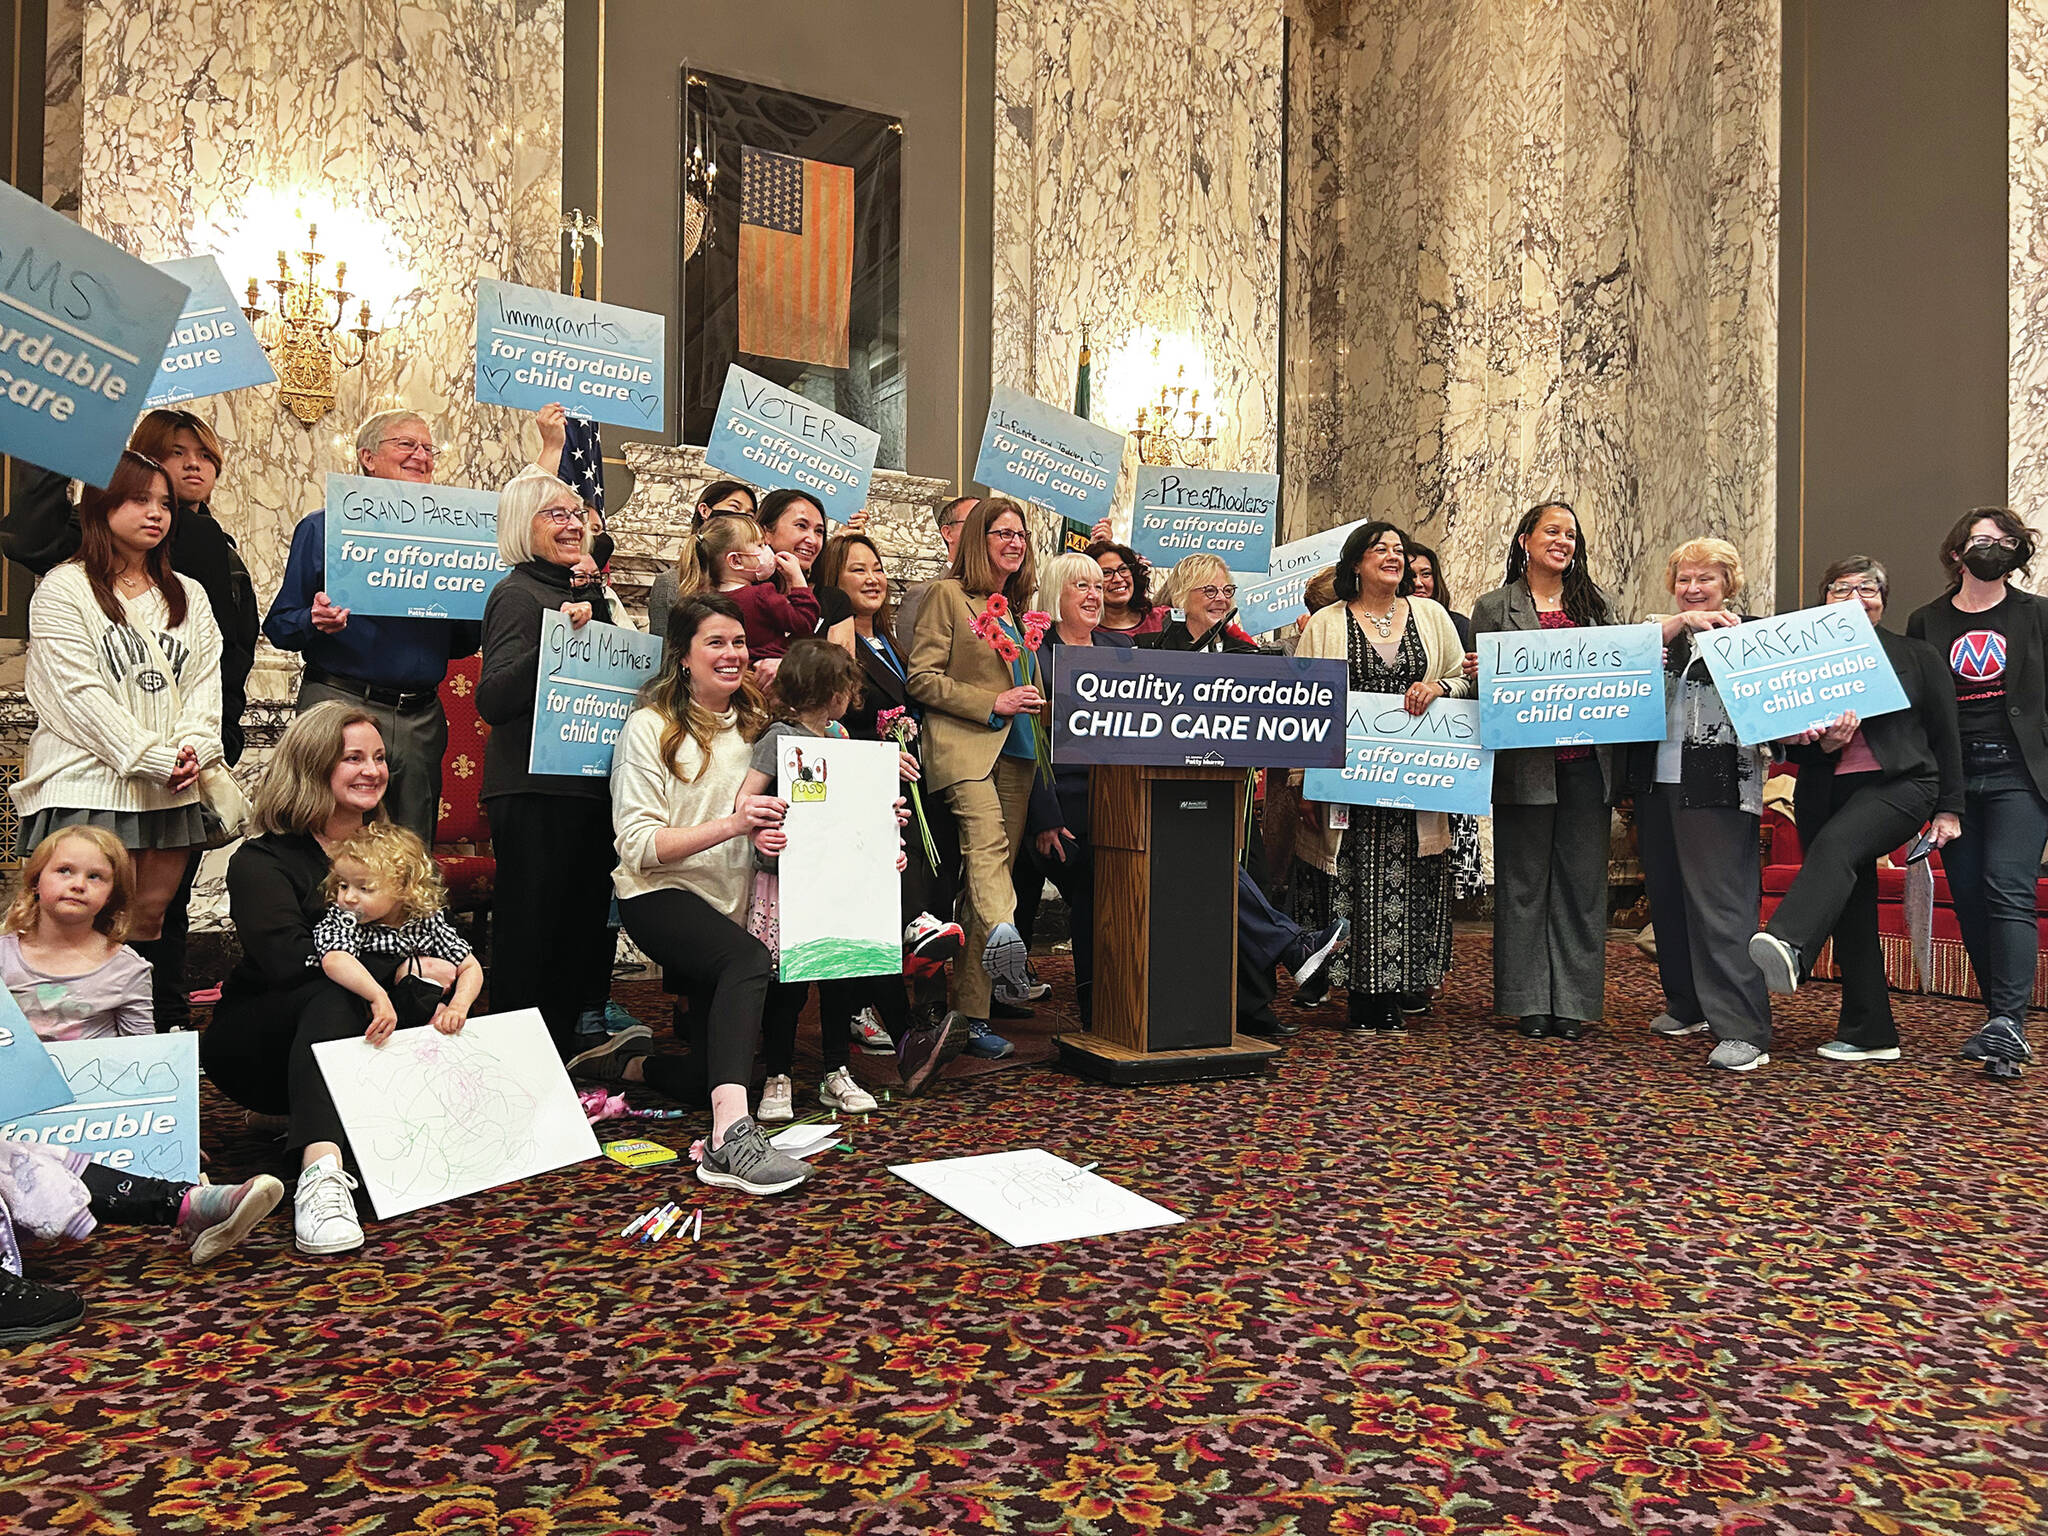 Contributed photo
Sen. Patty Murray, D-Washington, joined with supporters in Olympia to celebrate passage of a $1.85 billion increase in federal funding for the Child Care and Development Block Grant. The increase was part of a large appropriations bill adopted in December.